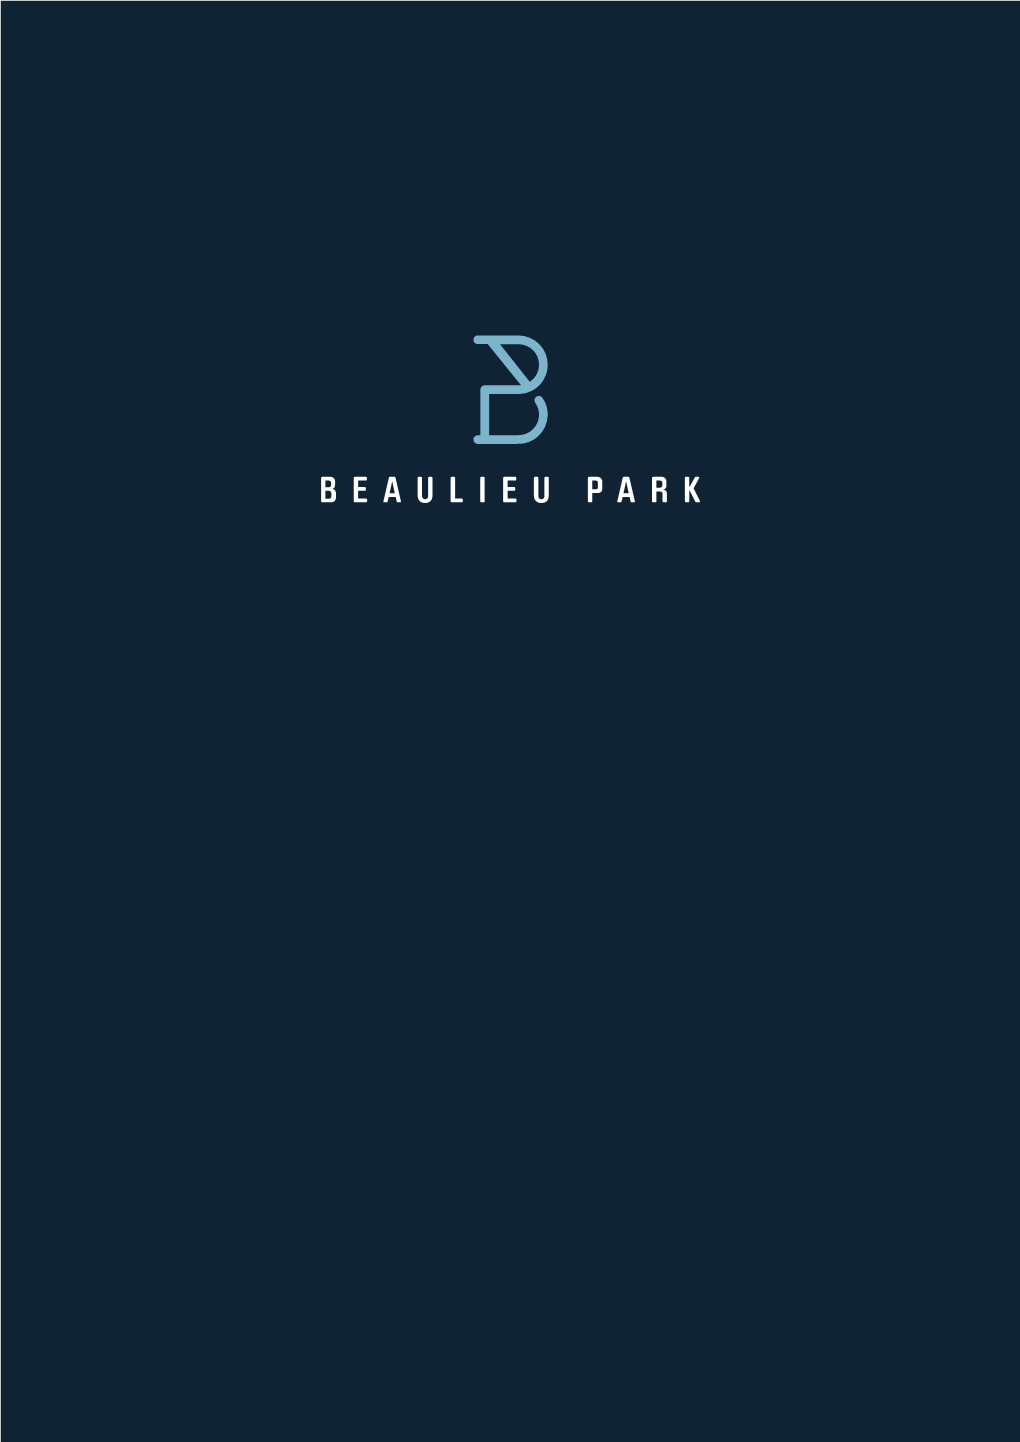 Beaulieu Park Is Well Connected to Central London by Rail and Road.”